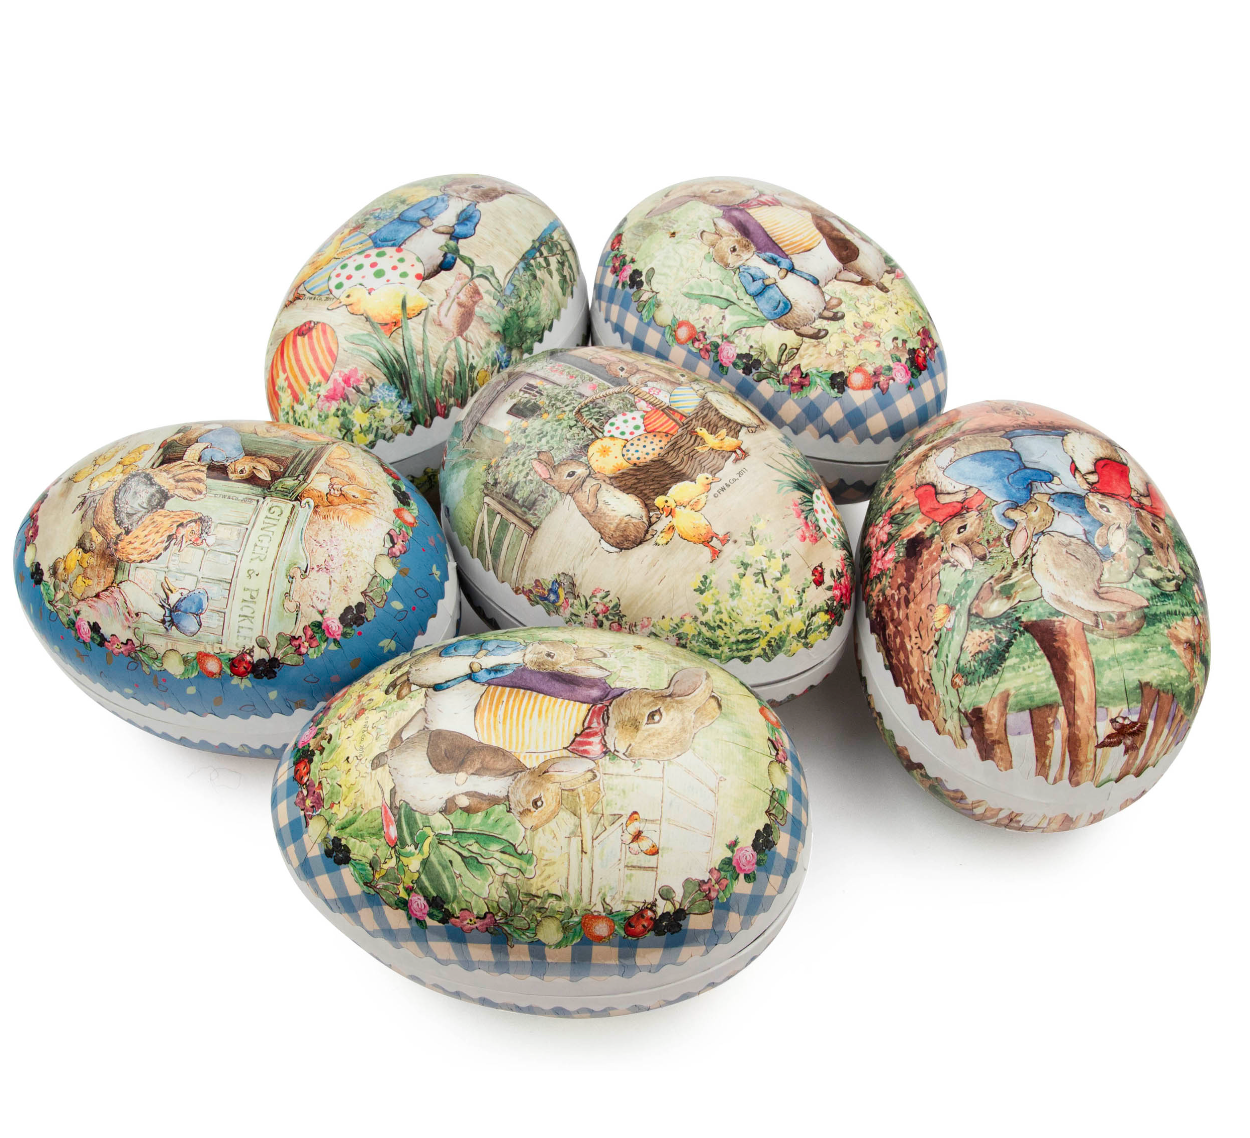 Beatrix Potter Peter Rabbit and Family Paper Mache Easter Eggs / Set of 6 / 6" tall